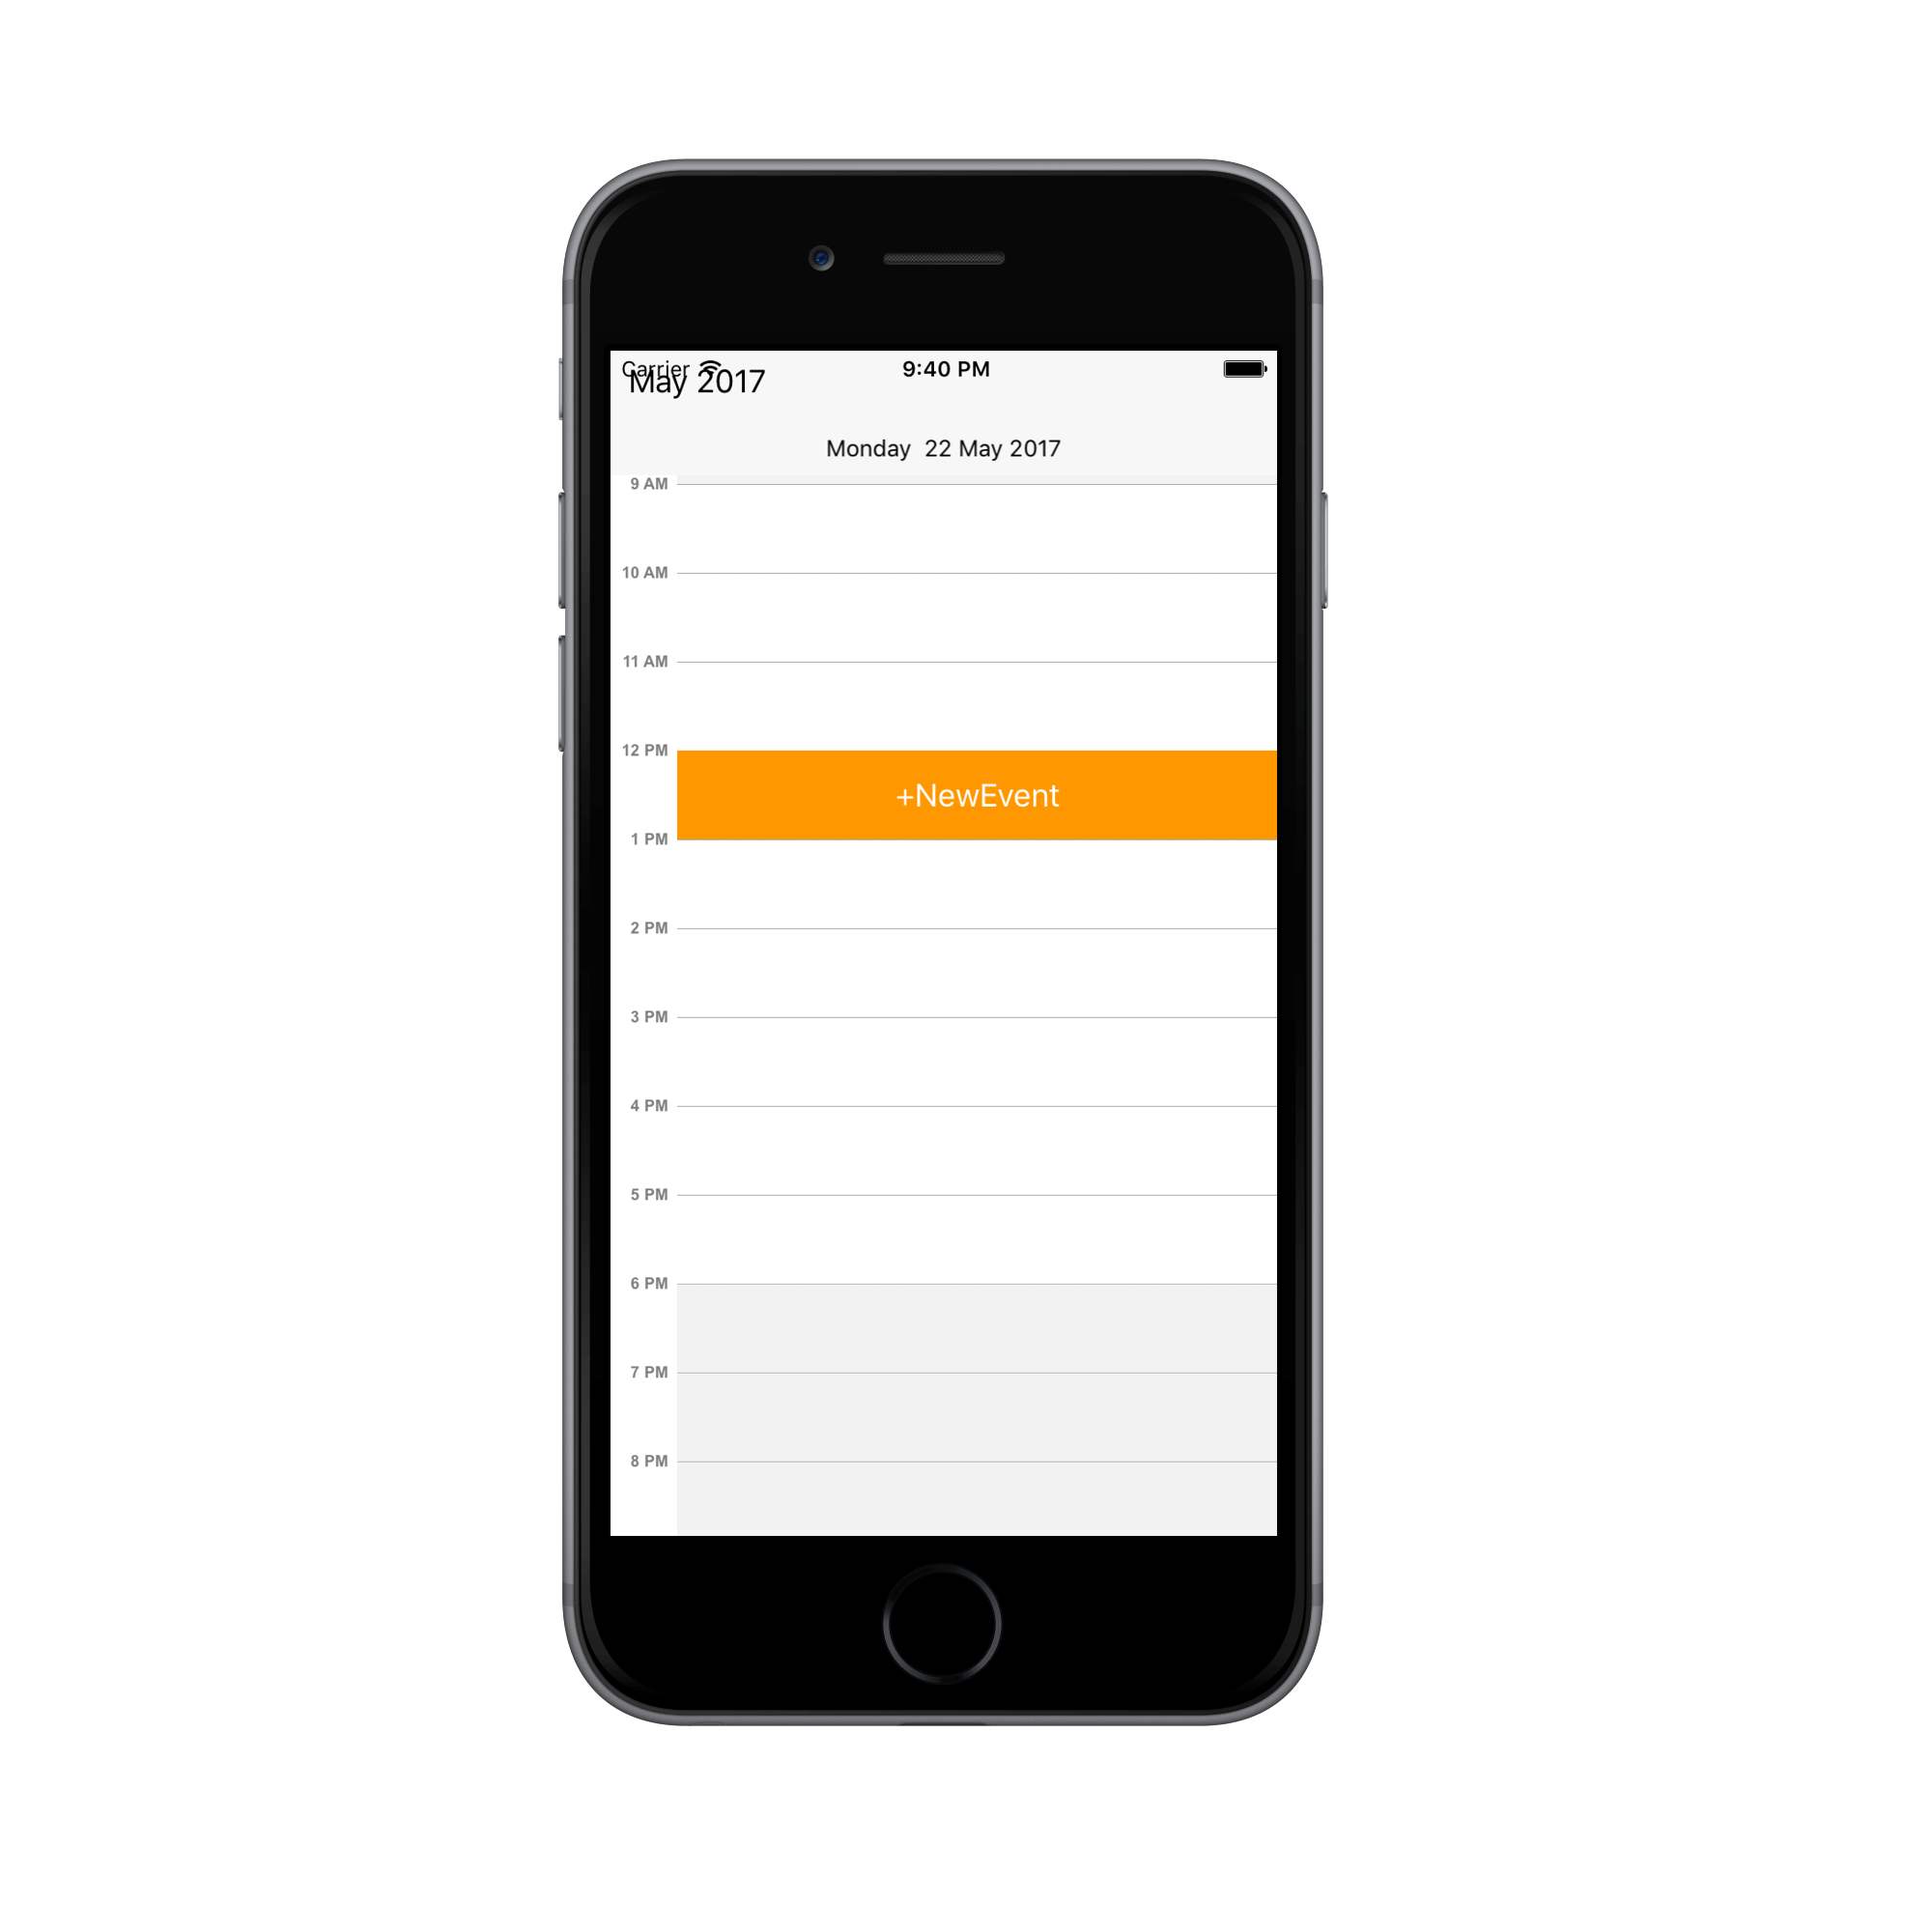 Custom selection view support for schedule day view in Xamarin.iOS